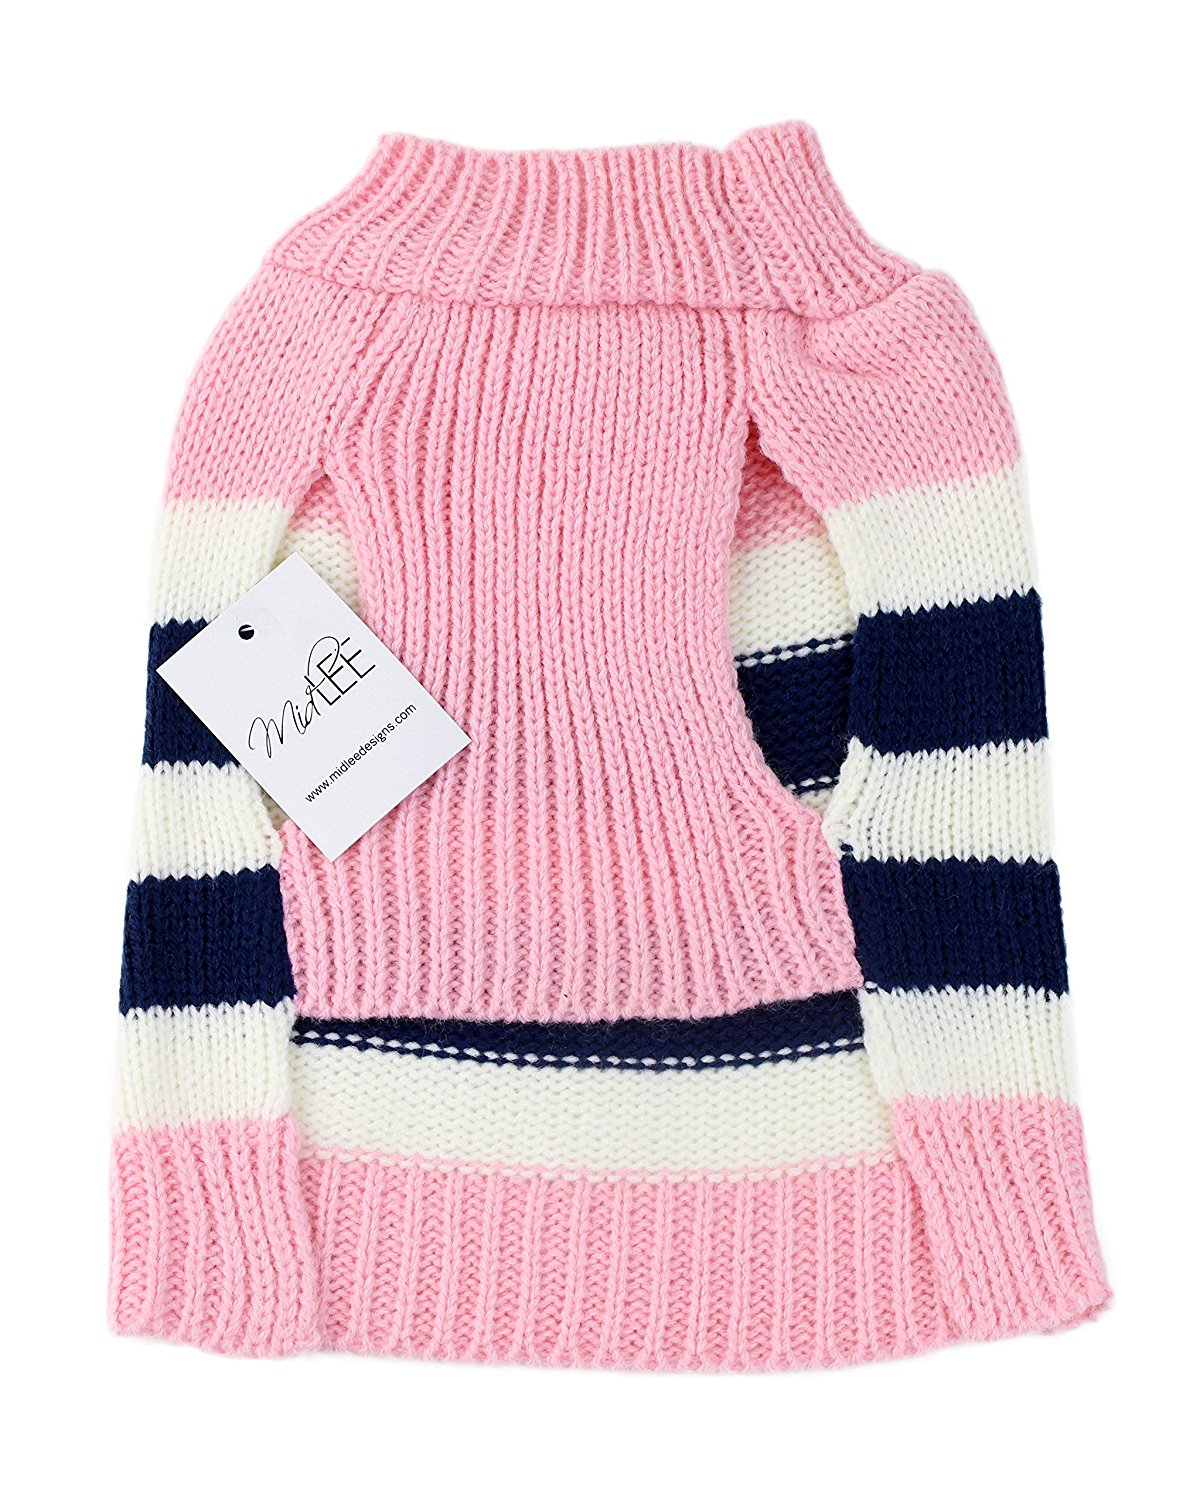 Midlee Striped Colorblock Dog Sweater